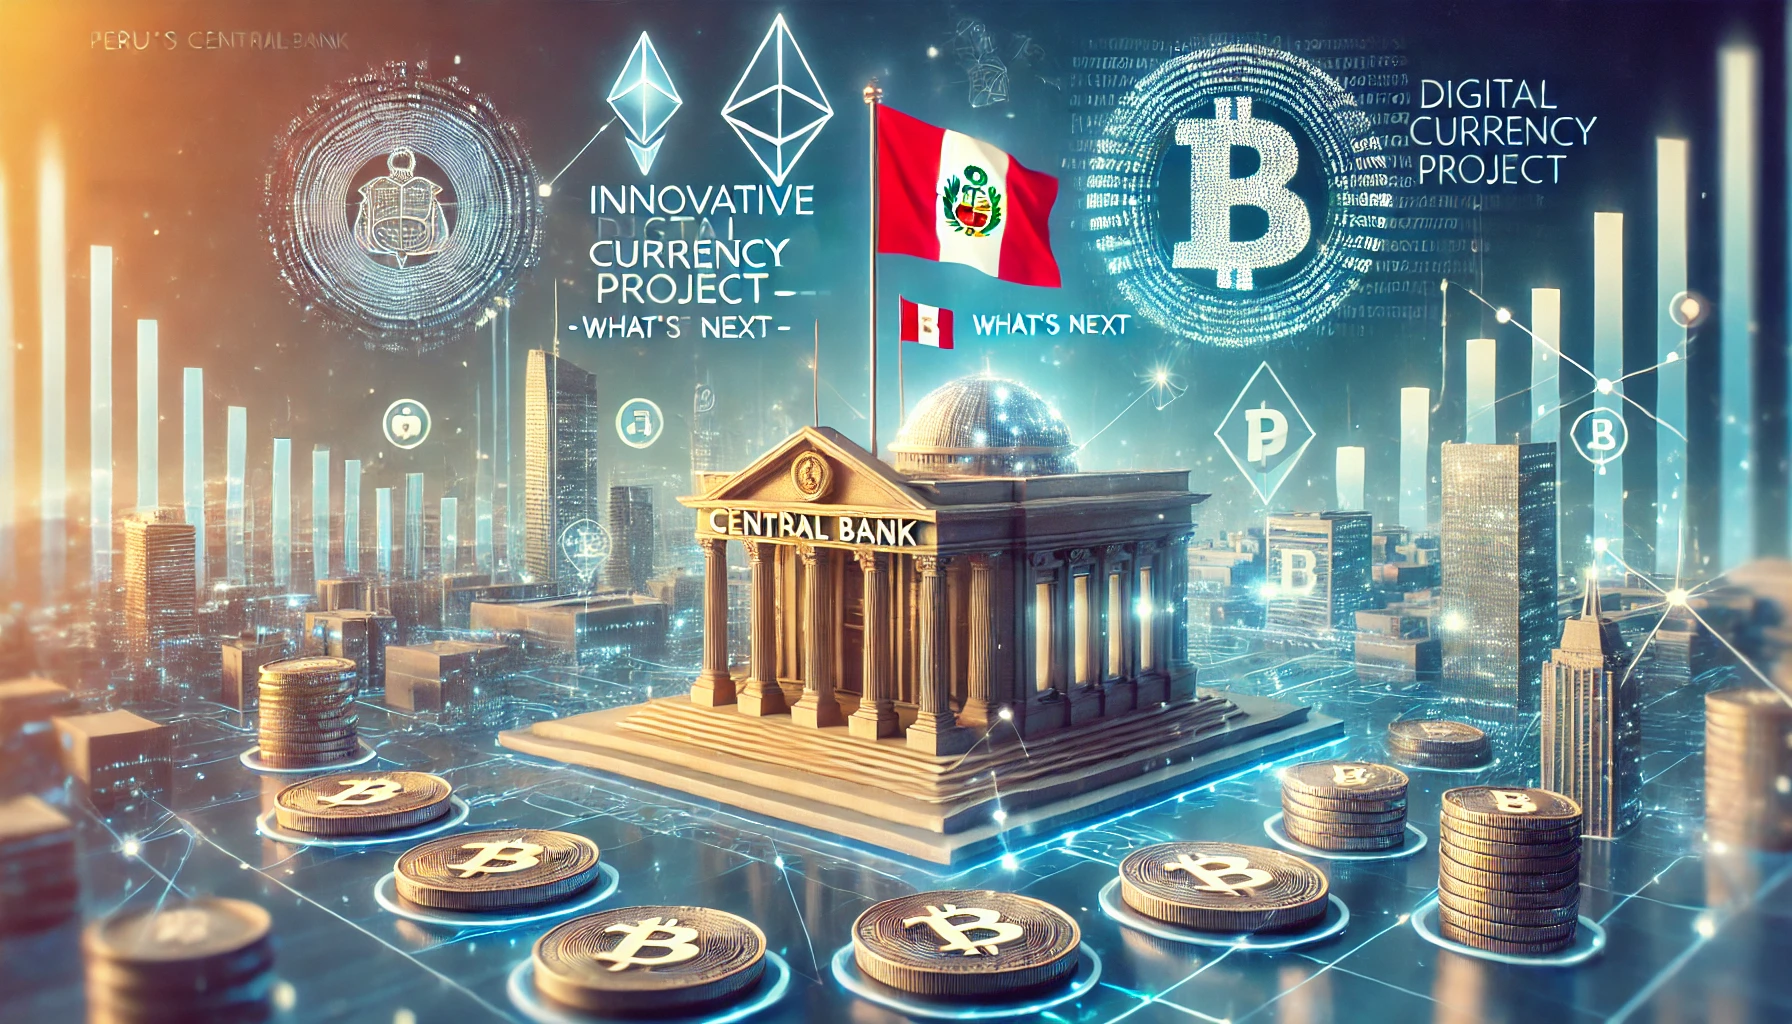 Peru’s Central Bank Embarks on Innovative Digital Currency Project – What’s Next?